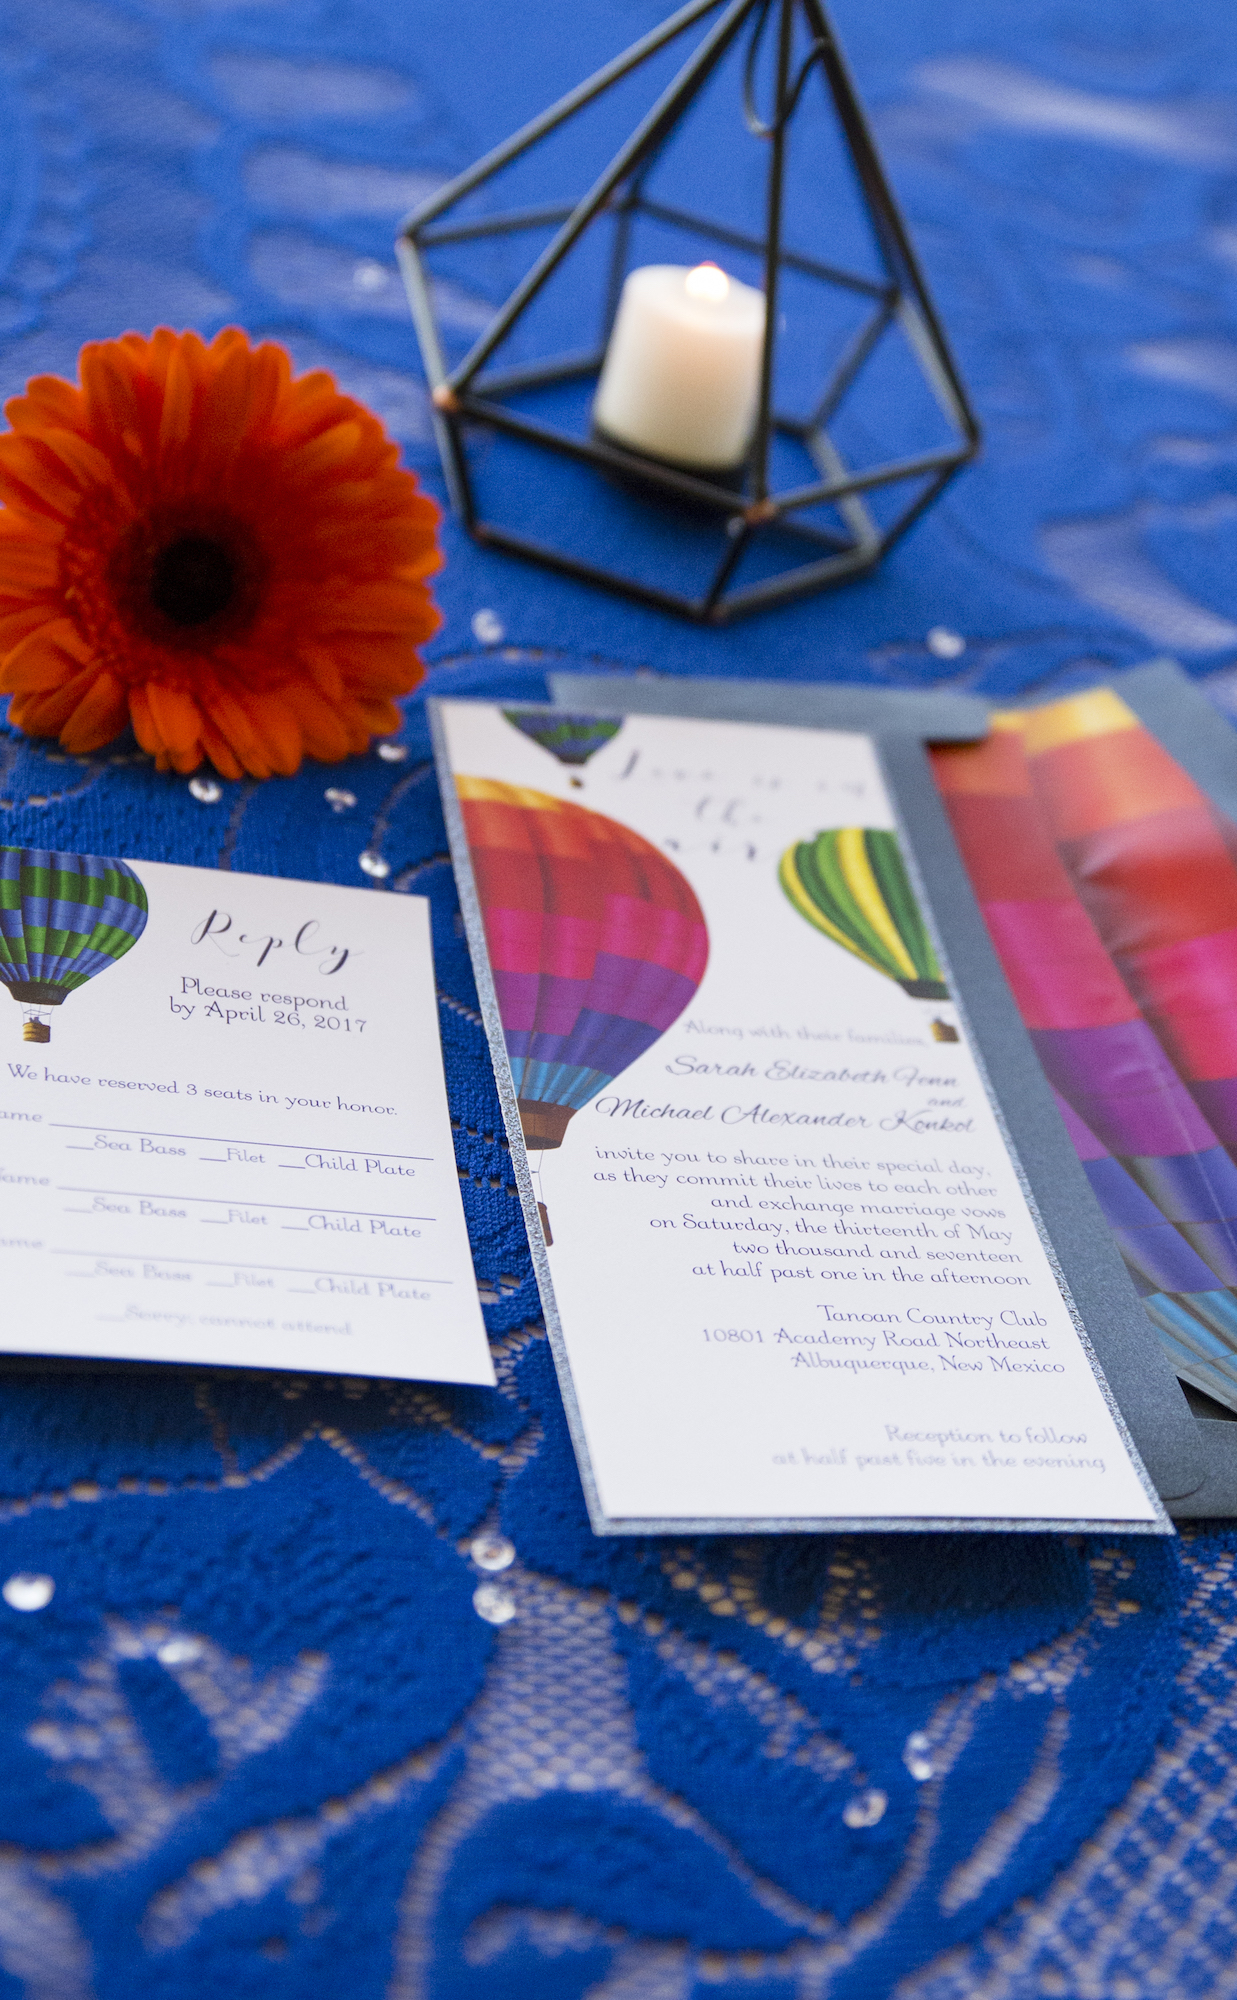 wedding planning design decor inspo real local New Mexico Perfect Wedding Guide couple bright color blue orange red hot air balloon love invitations design tablescape lace sunflower details indoor event ceremony love couple bride